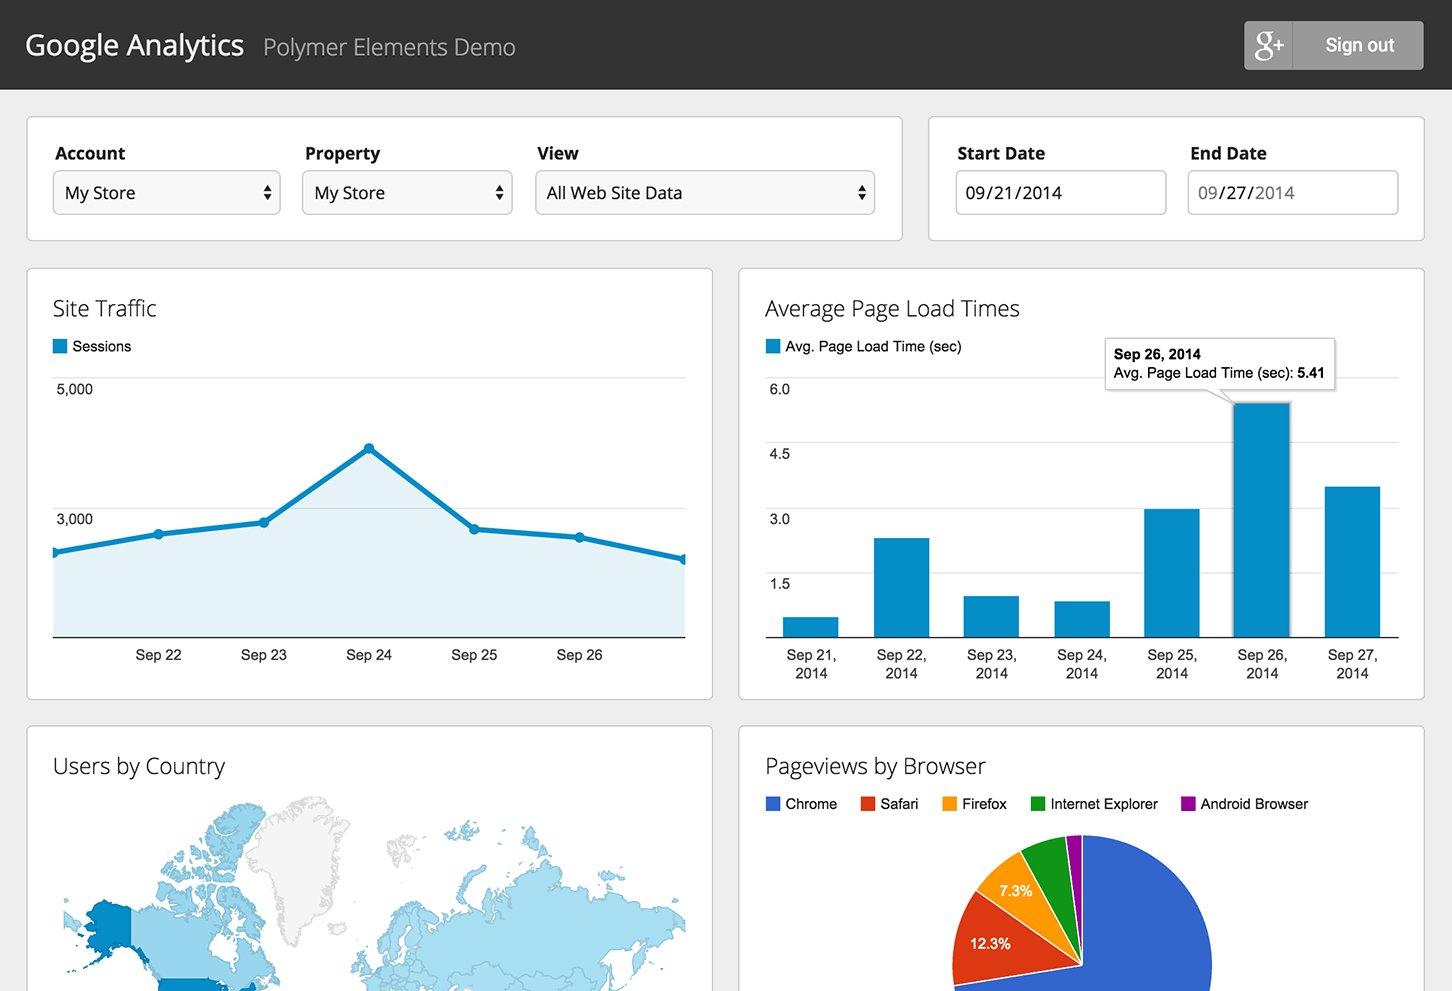 Is the data is Google Analytics misleading you?